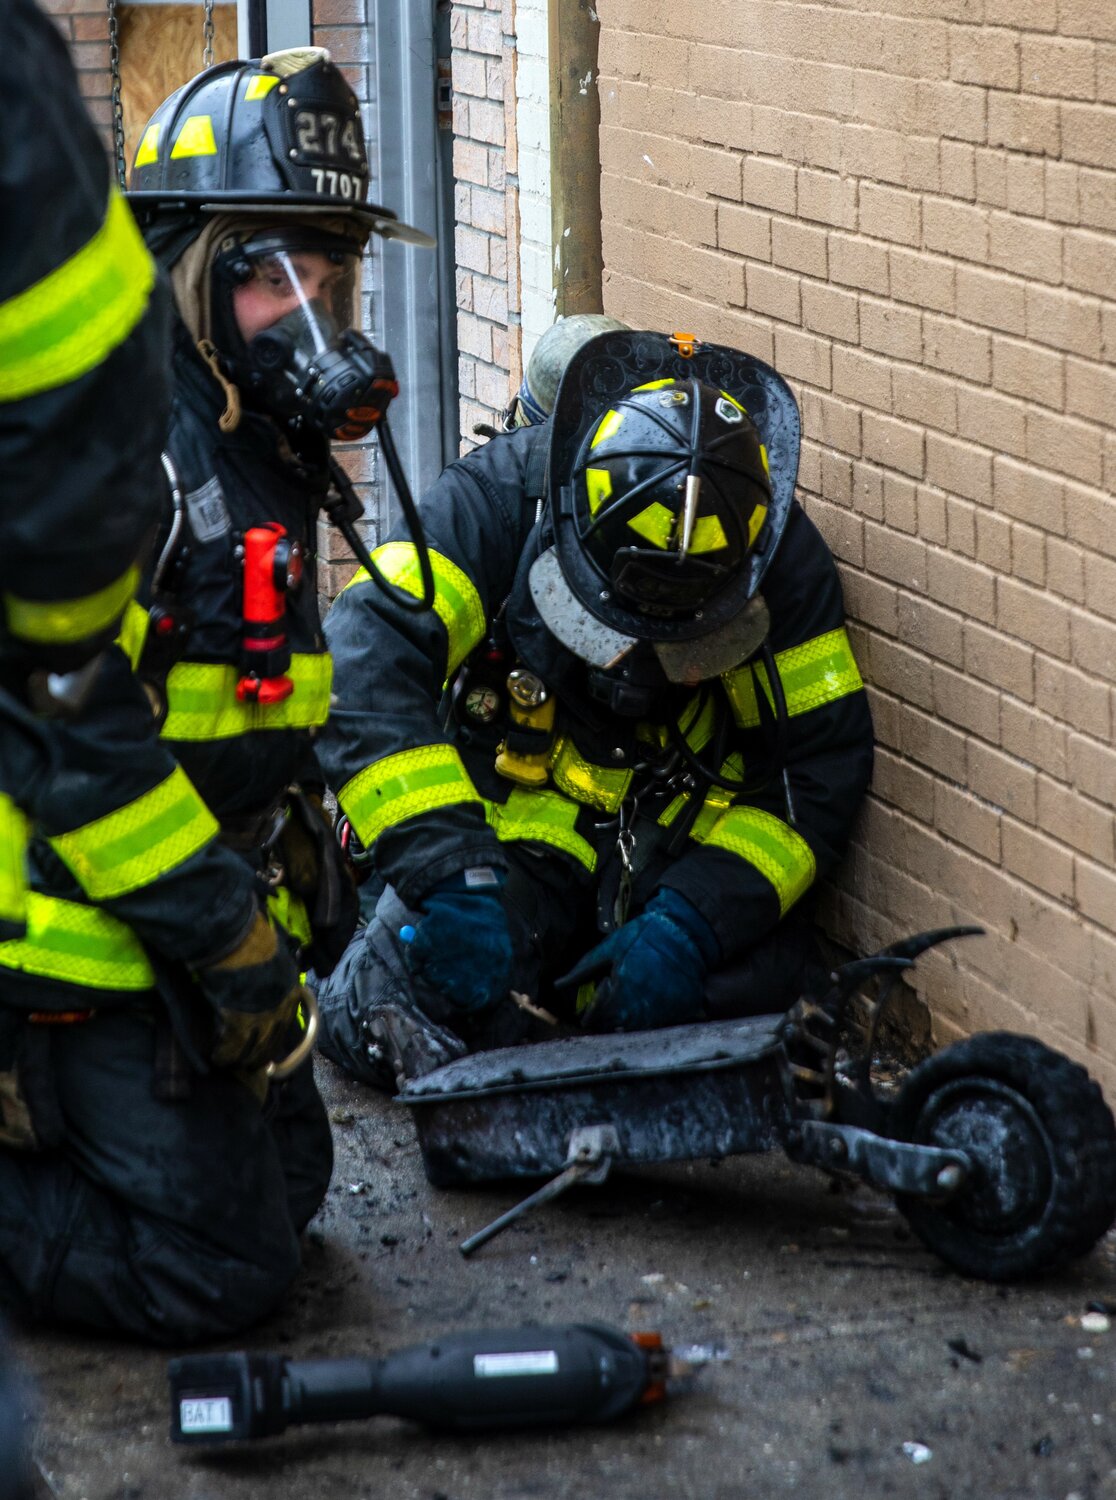 New York City firefighters wearing breathing masks as they extinguish a battery fire on a two-wheeled scooter.